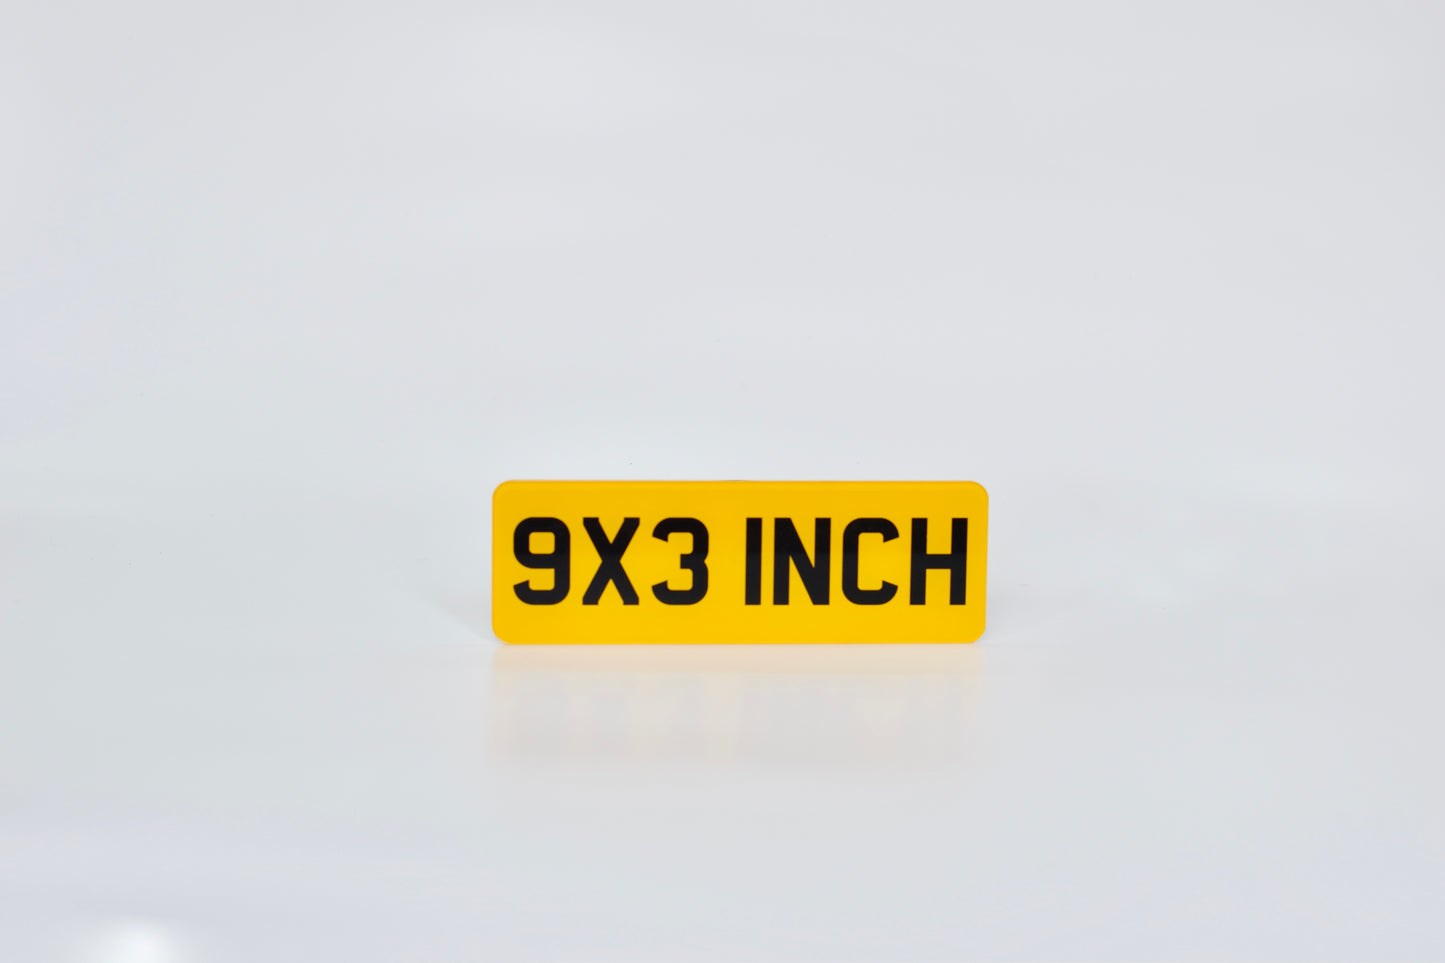 Acrylic 9 x 3 inch Motorcycle Number Plate